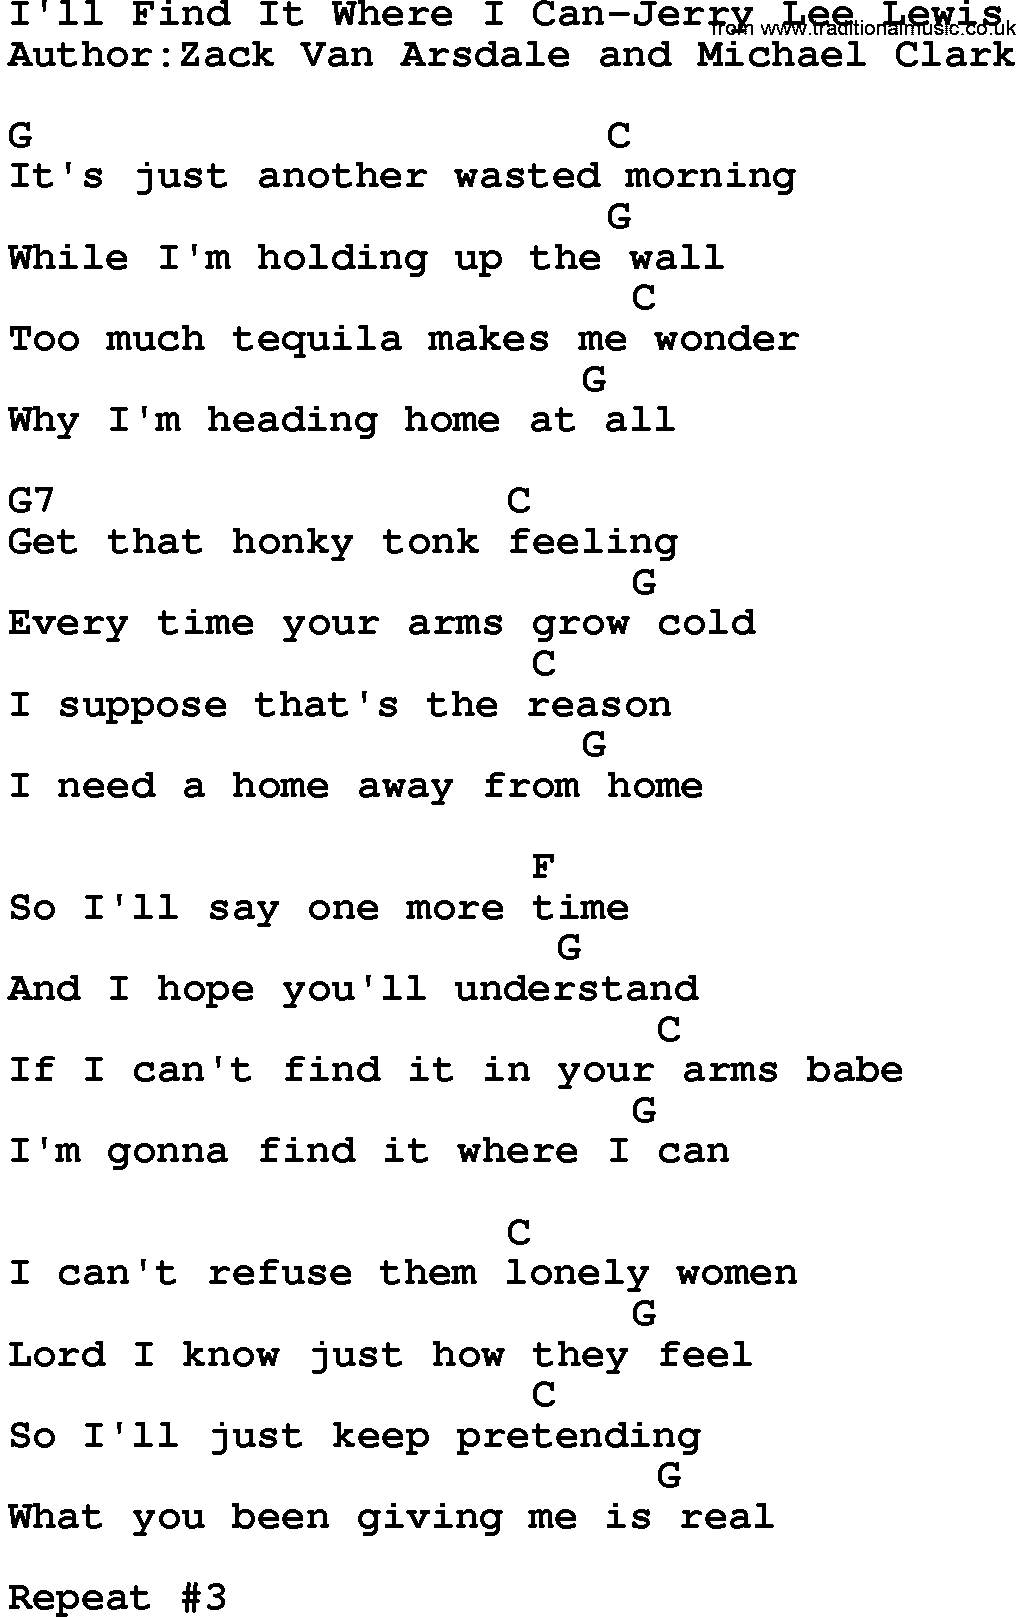 Country music song: I'll Find It Where I Can-Jerry Lee Lewis lyrics and chords